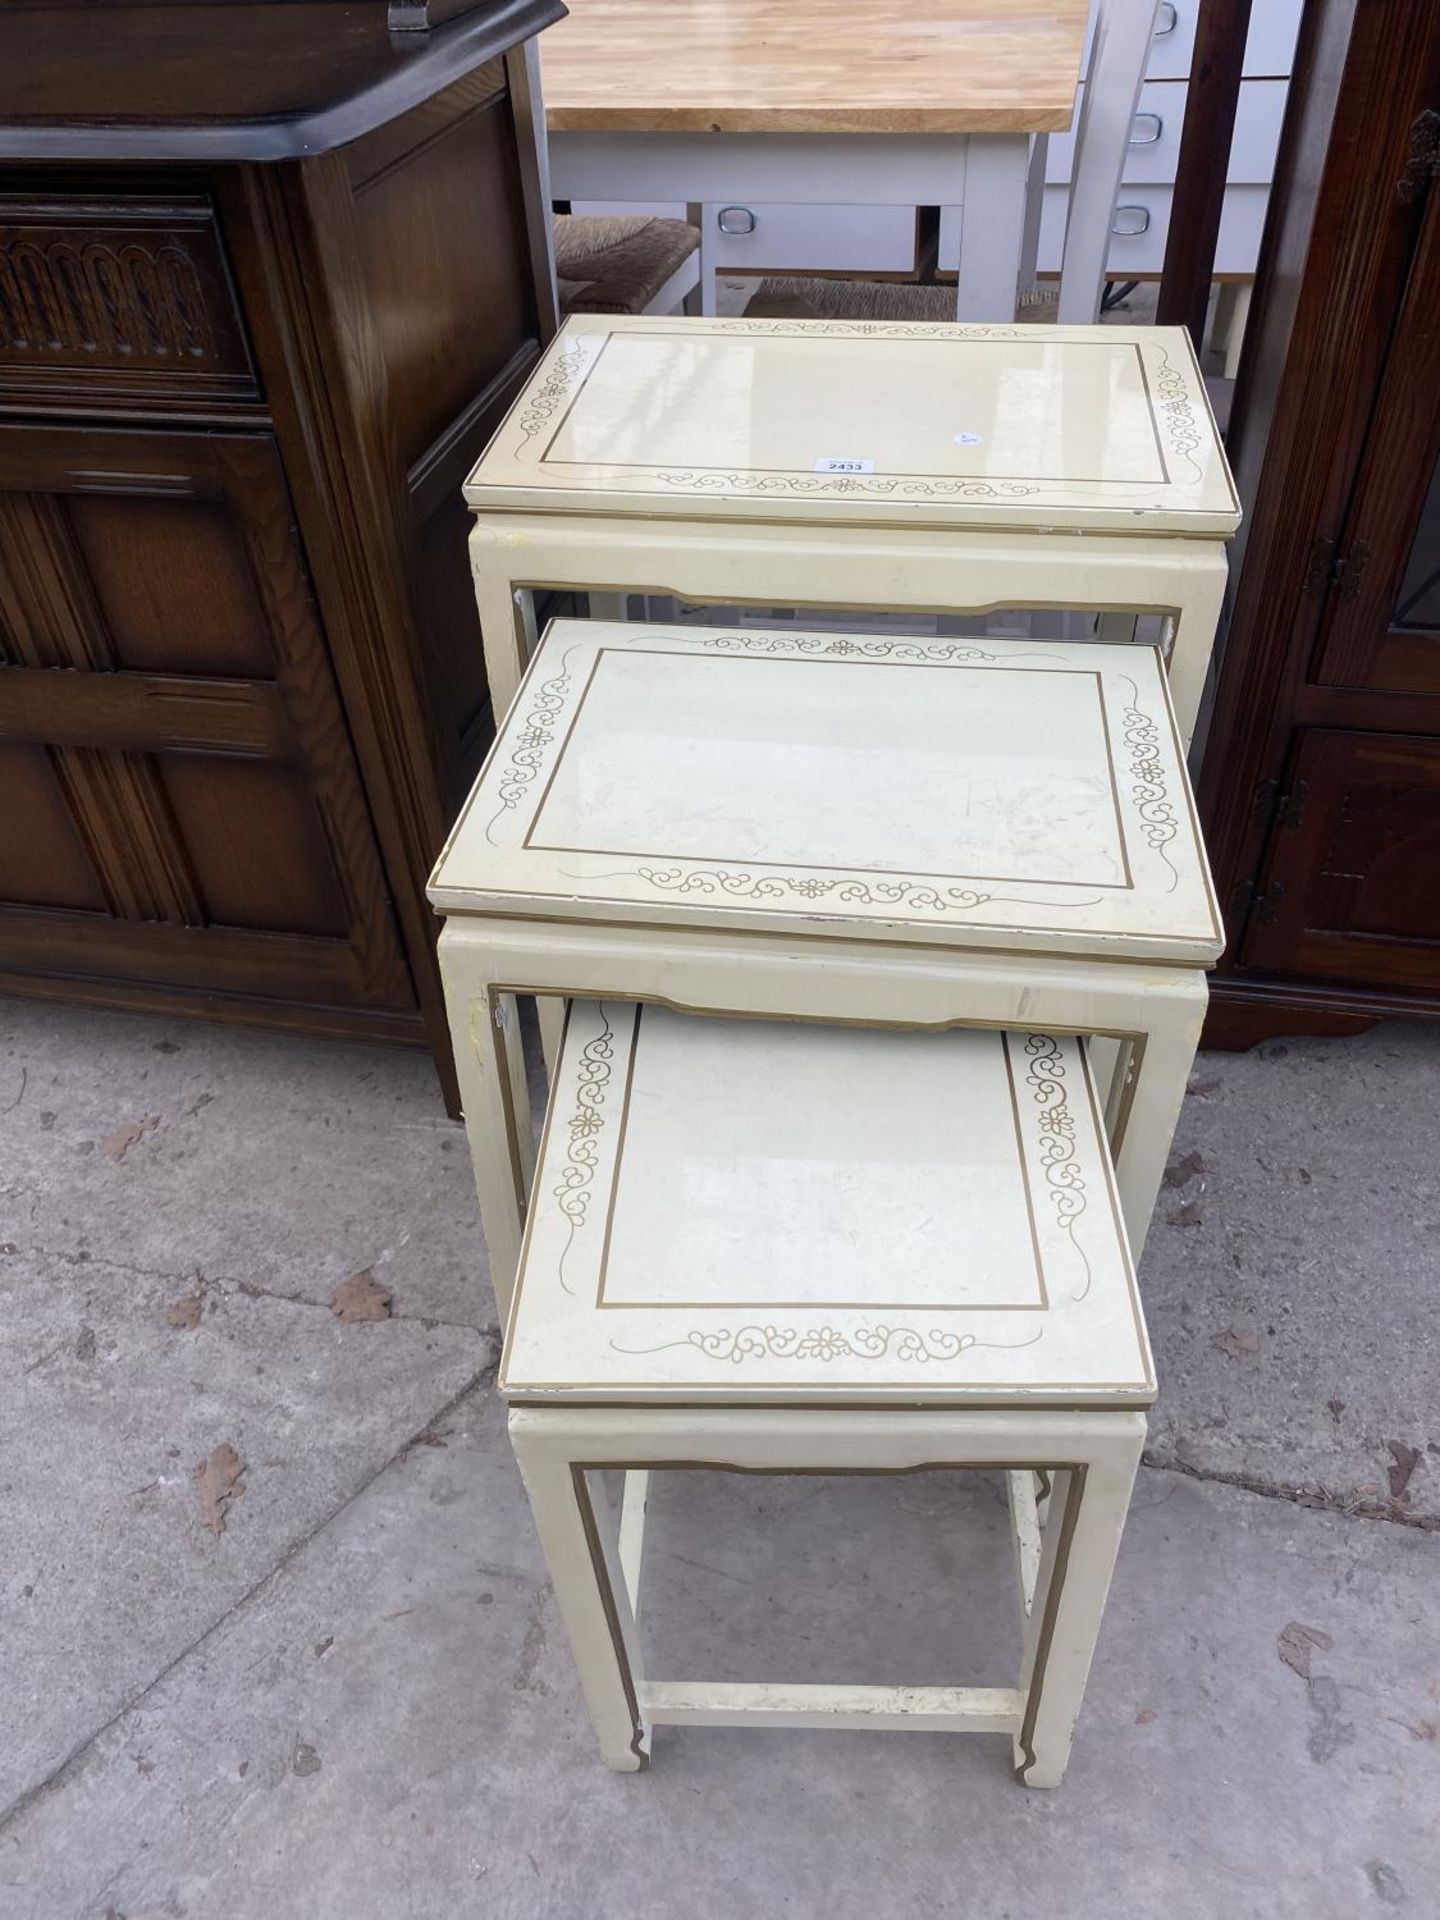 A MODERN NEST OF 4 CREAM/GILT TABLES - Image 3 of 4